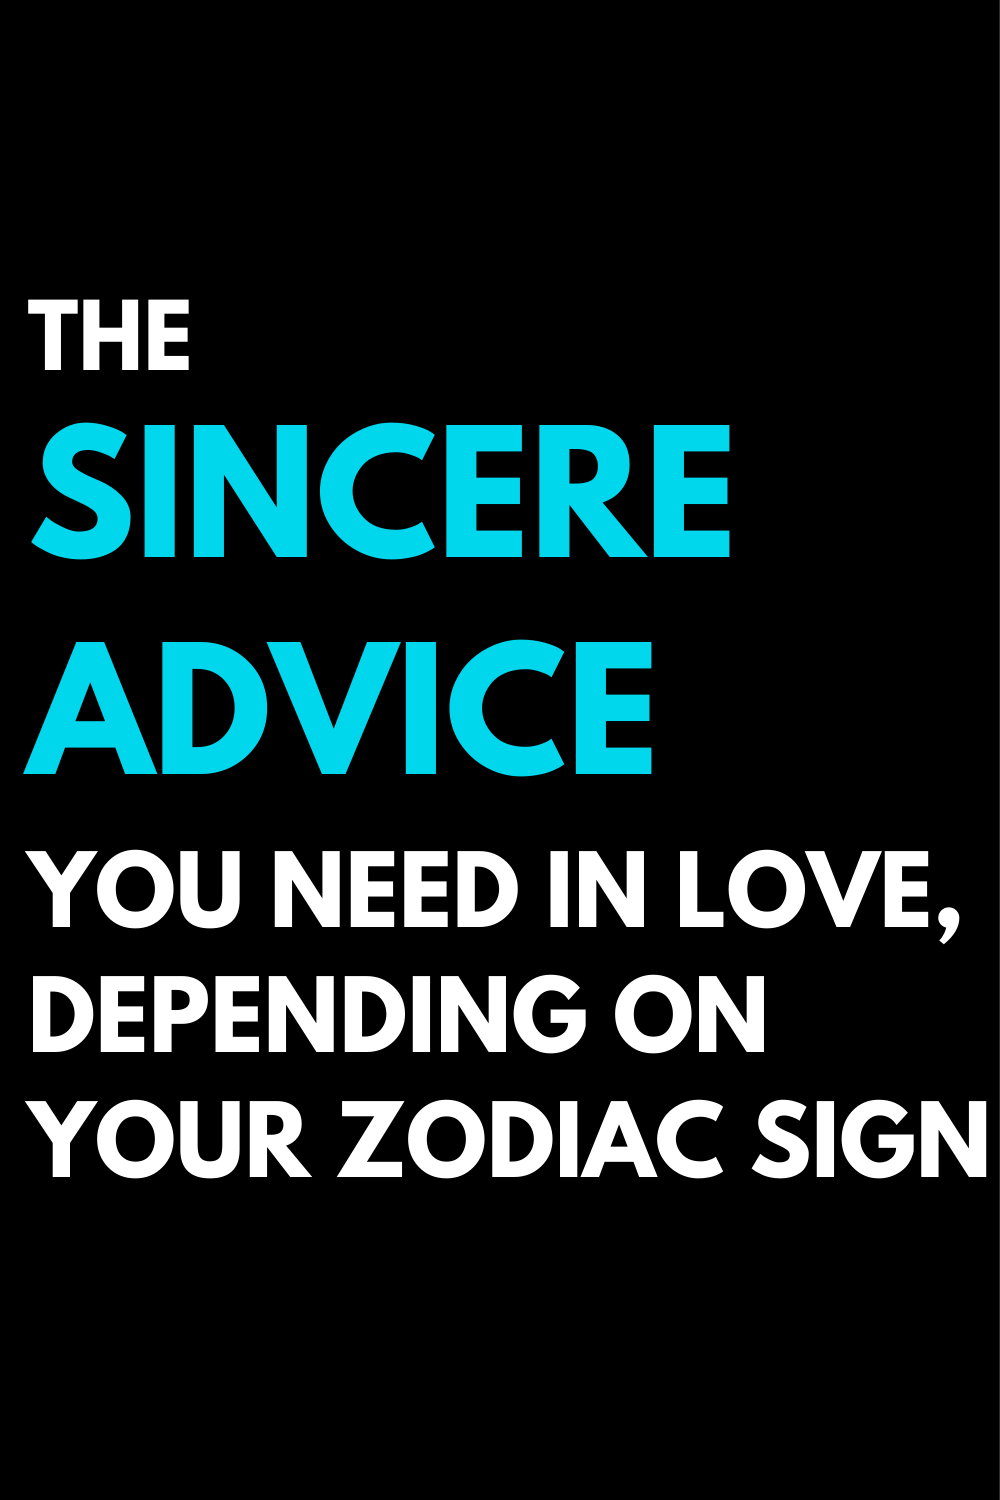 The sincere advice you need in love, depending on your zodiac sign